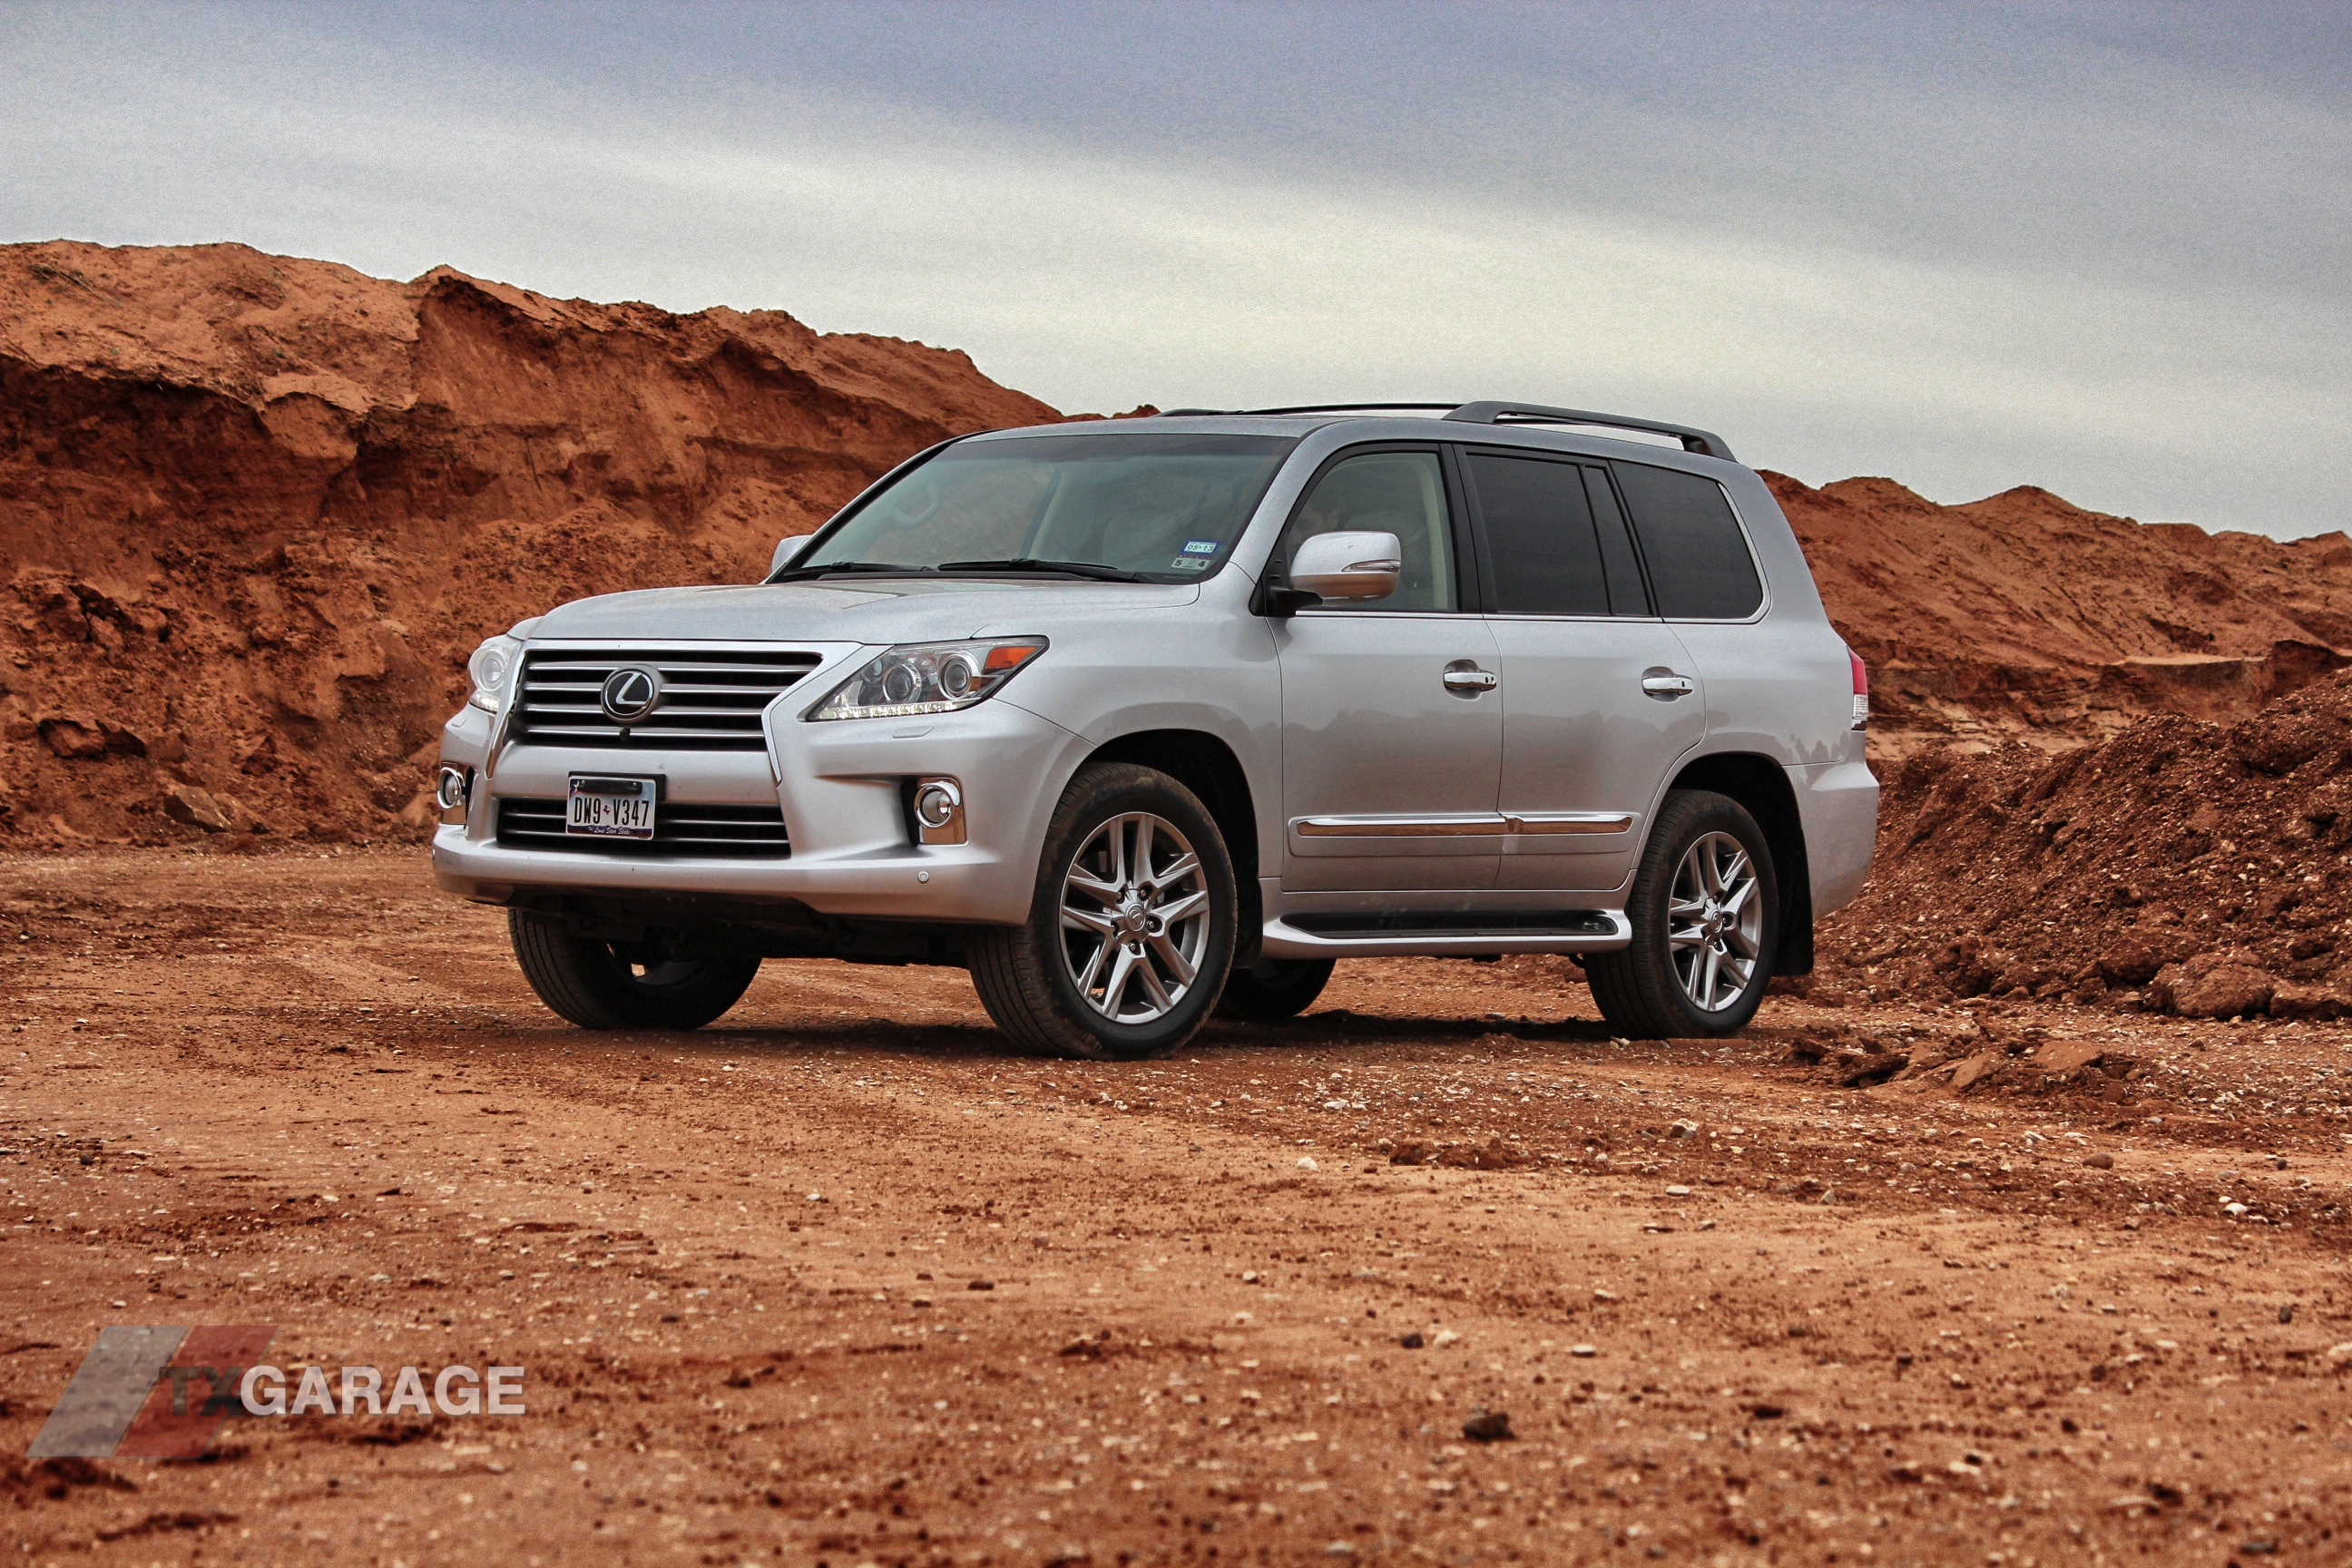 Full Review of the 2013 Lexus LX 570 | txGarage